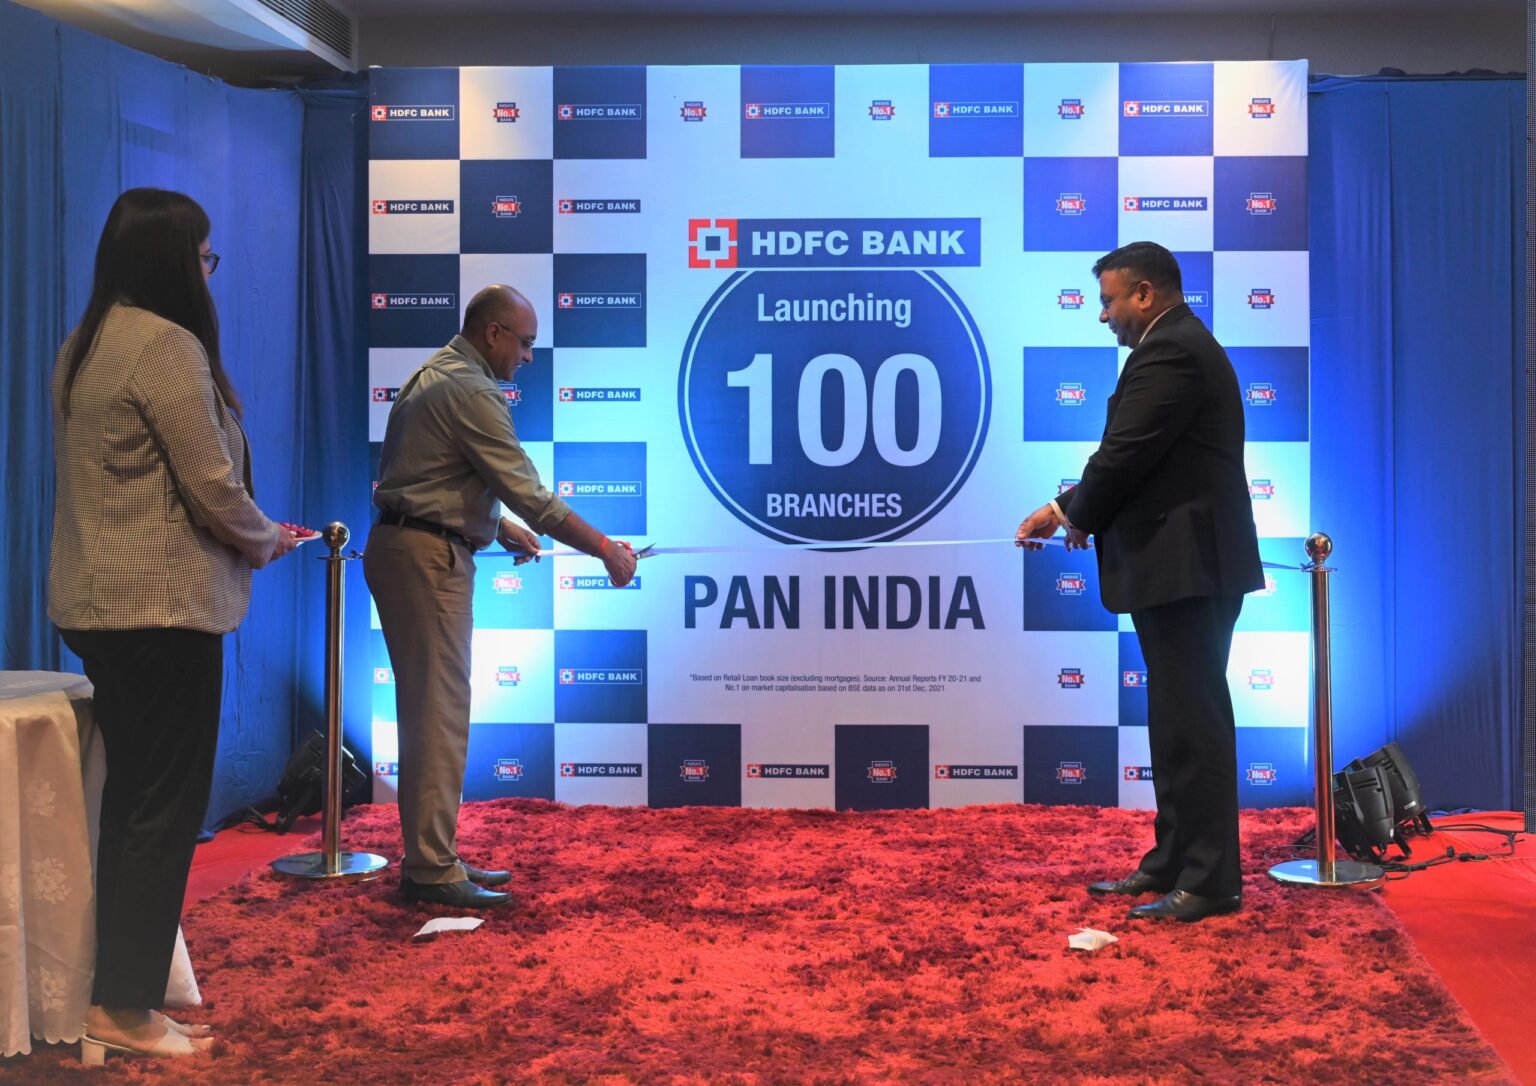 Hdfc Bank Inaugurates Over 100 Banking Correspondent Centers Across India The Gypsy 7499